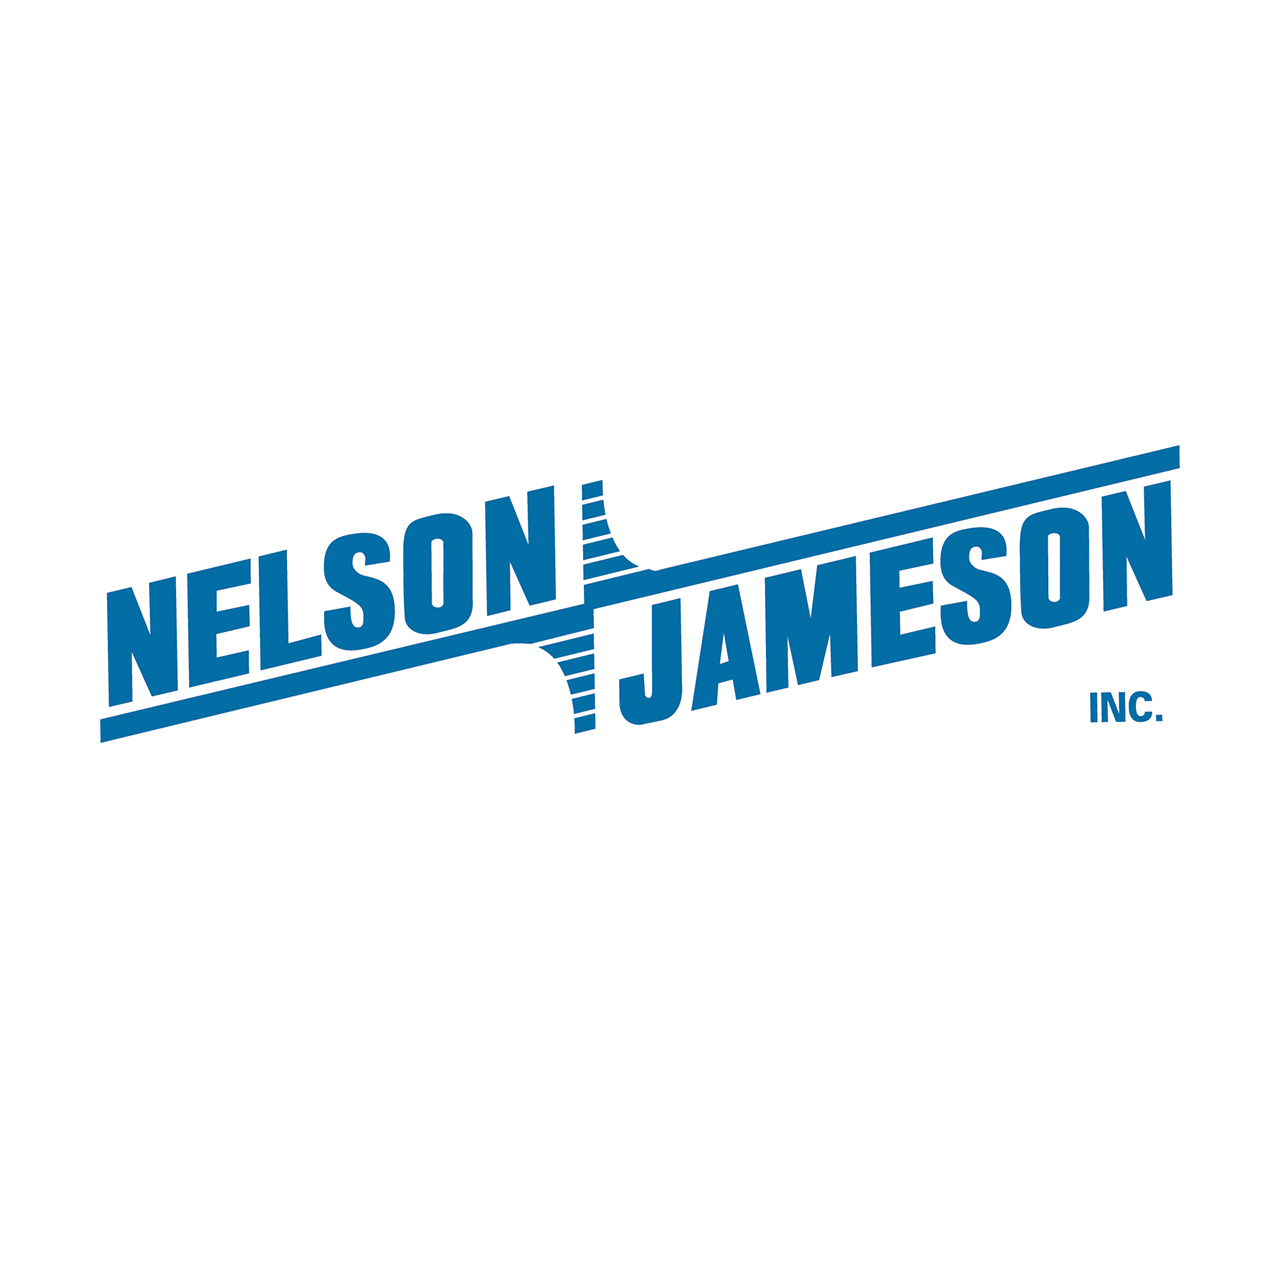 Nelson-Jameson Stackable Petri Dishes